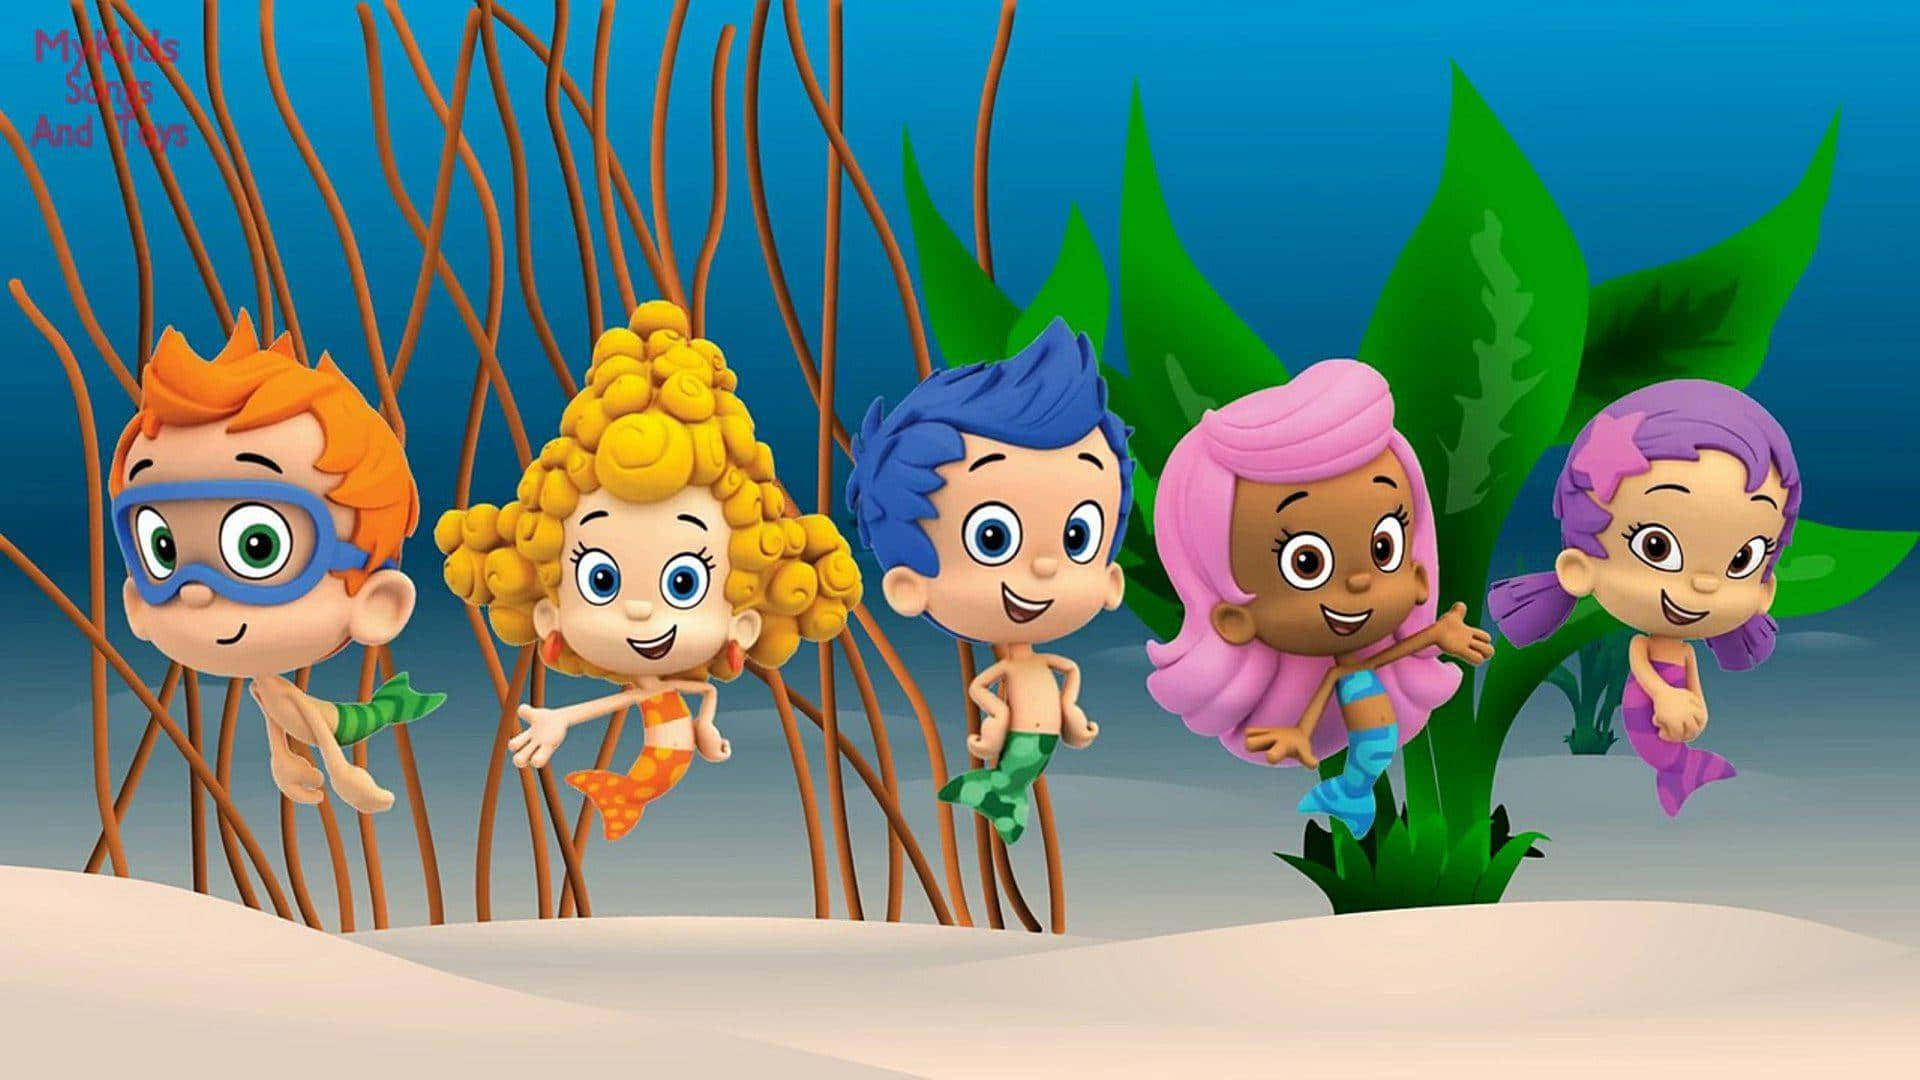 A Group of Bubble Guppies Friends Ready For Fun